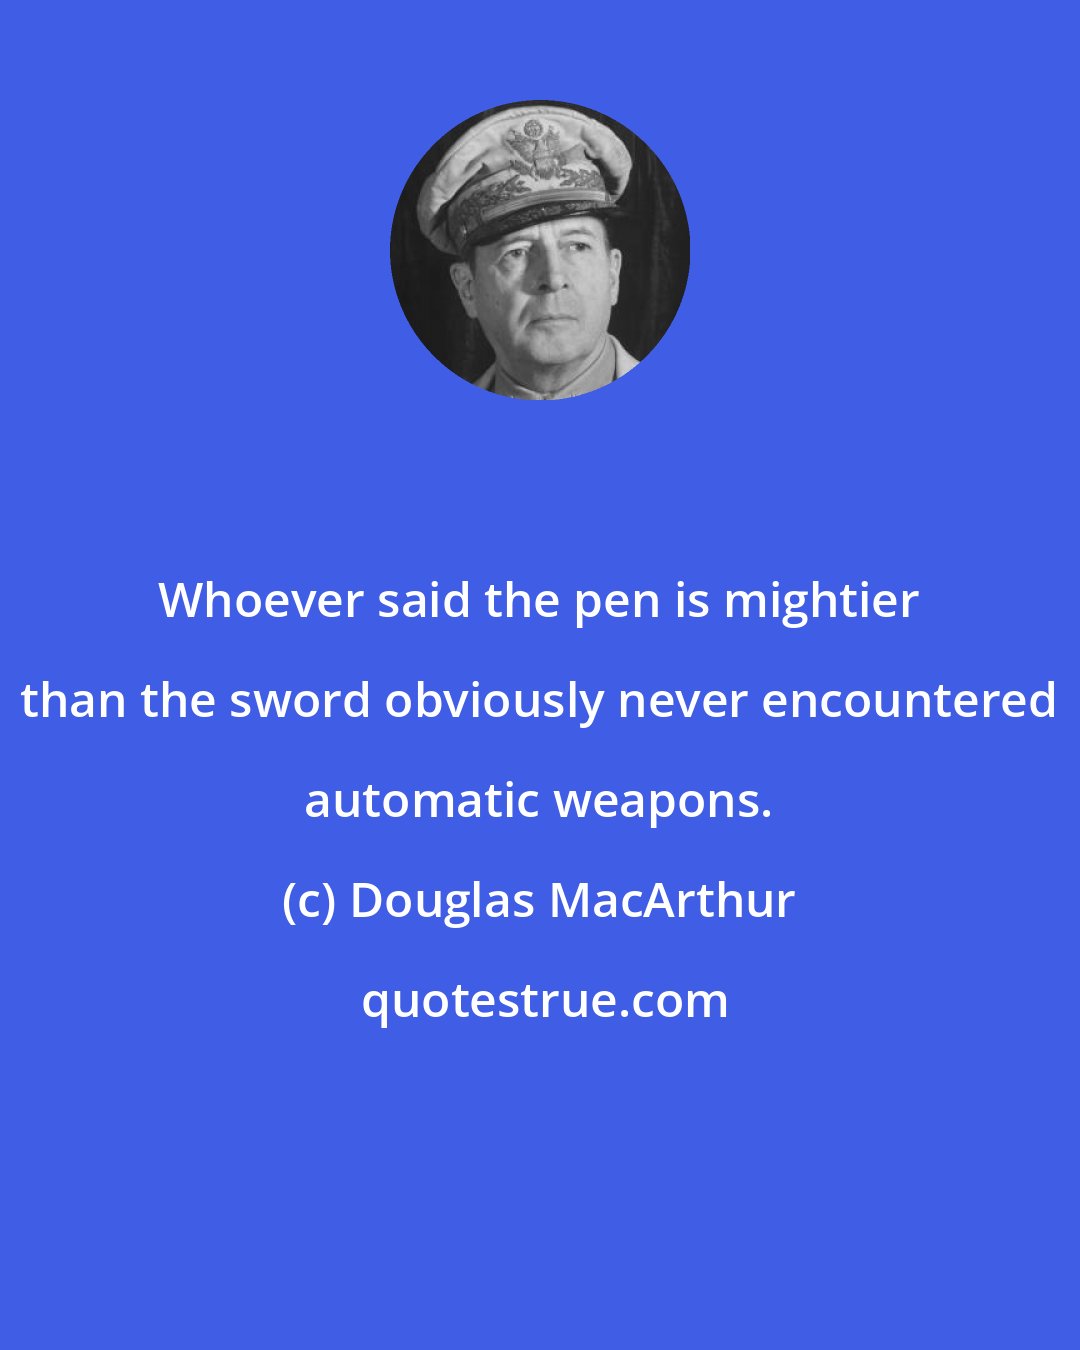 Douglas MacArthur: Whoever said the pen is mightier than the sword obviously never encountered automatic weapons.